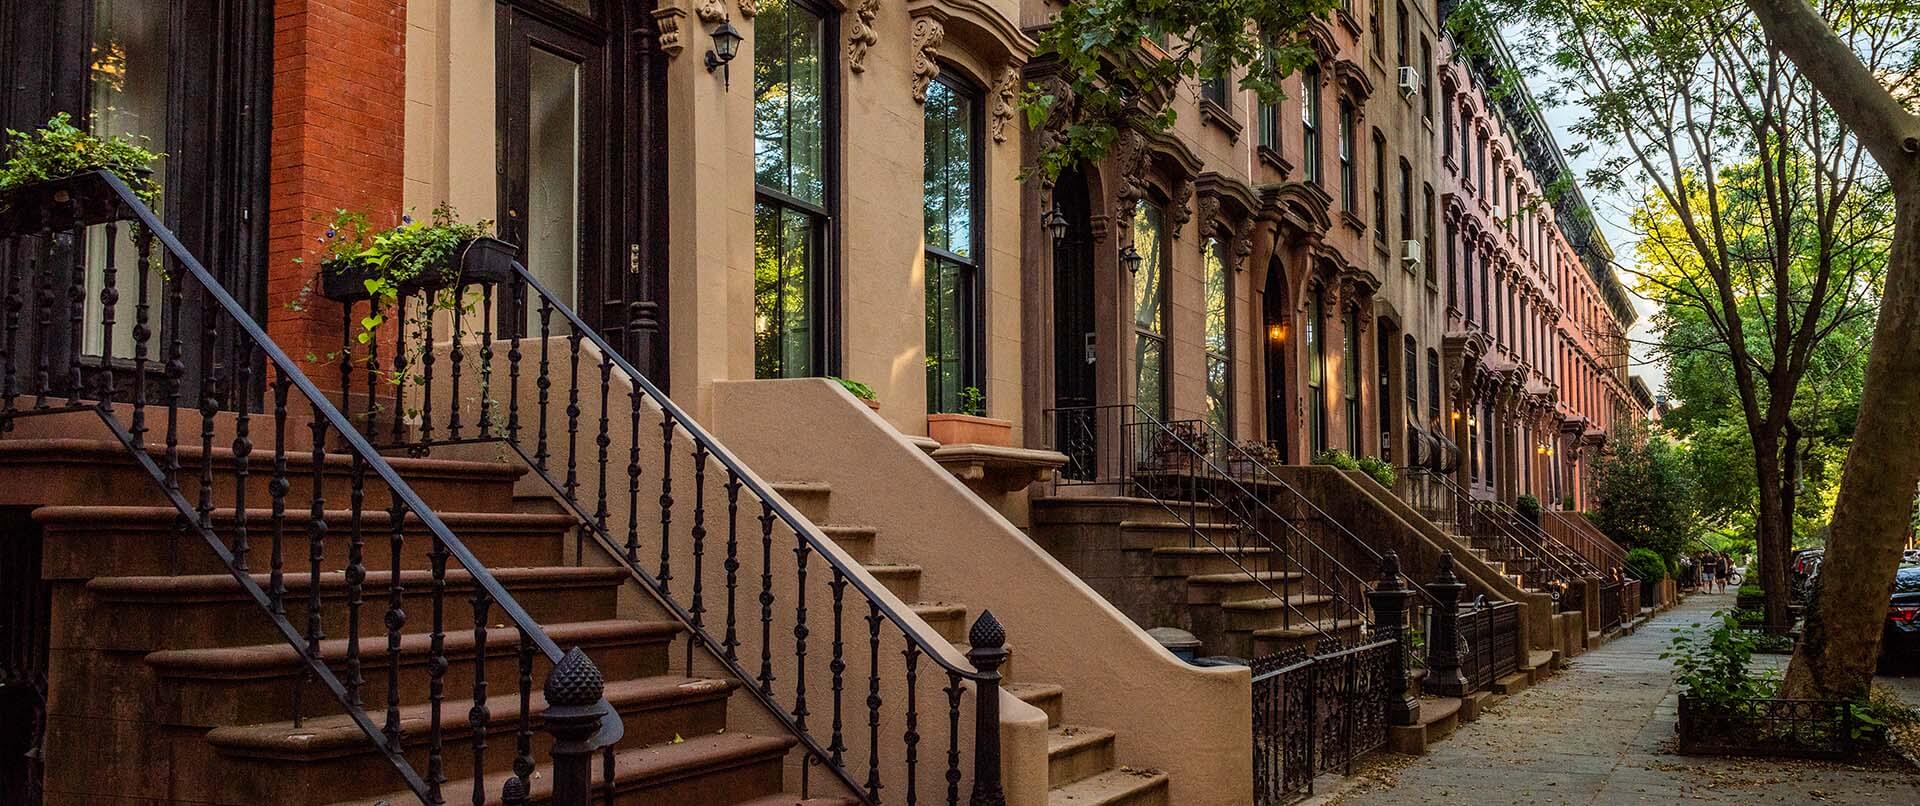 Brownstones on a tree lined street in New York City | Psychiatrist and addiction treatment expert, Stephen Gilman MD, offers treatment solutions for general psychiatry and addiction in NYC, NY